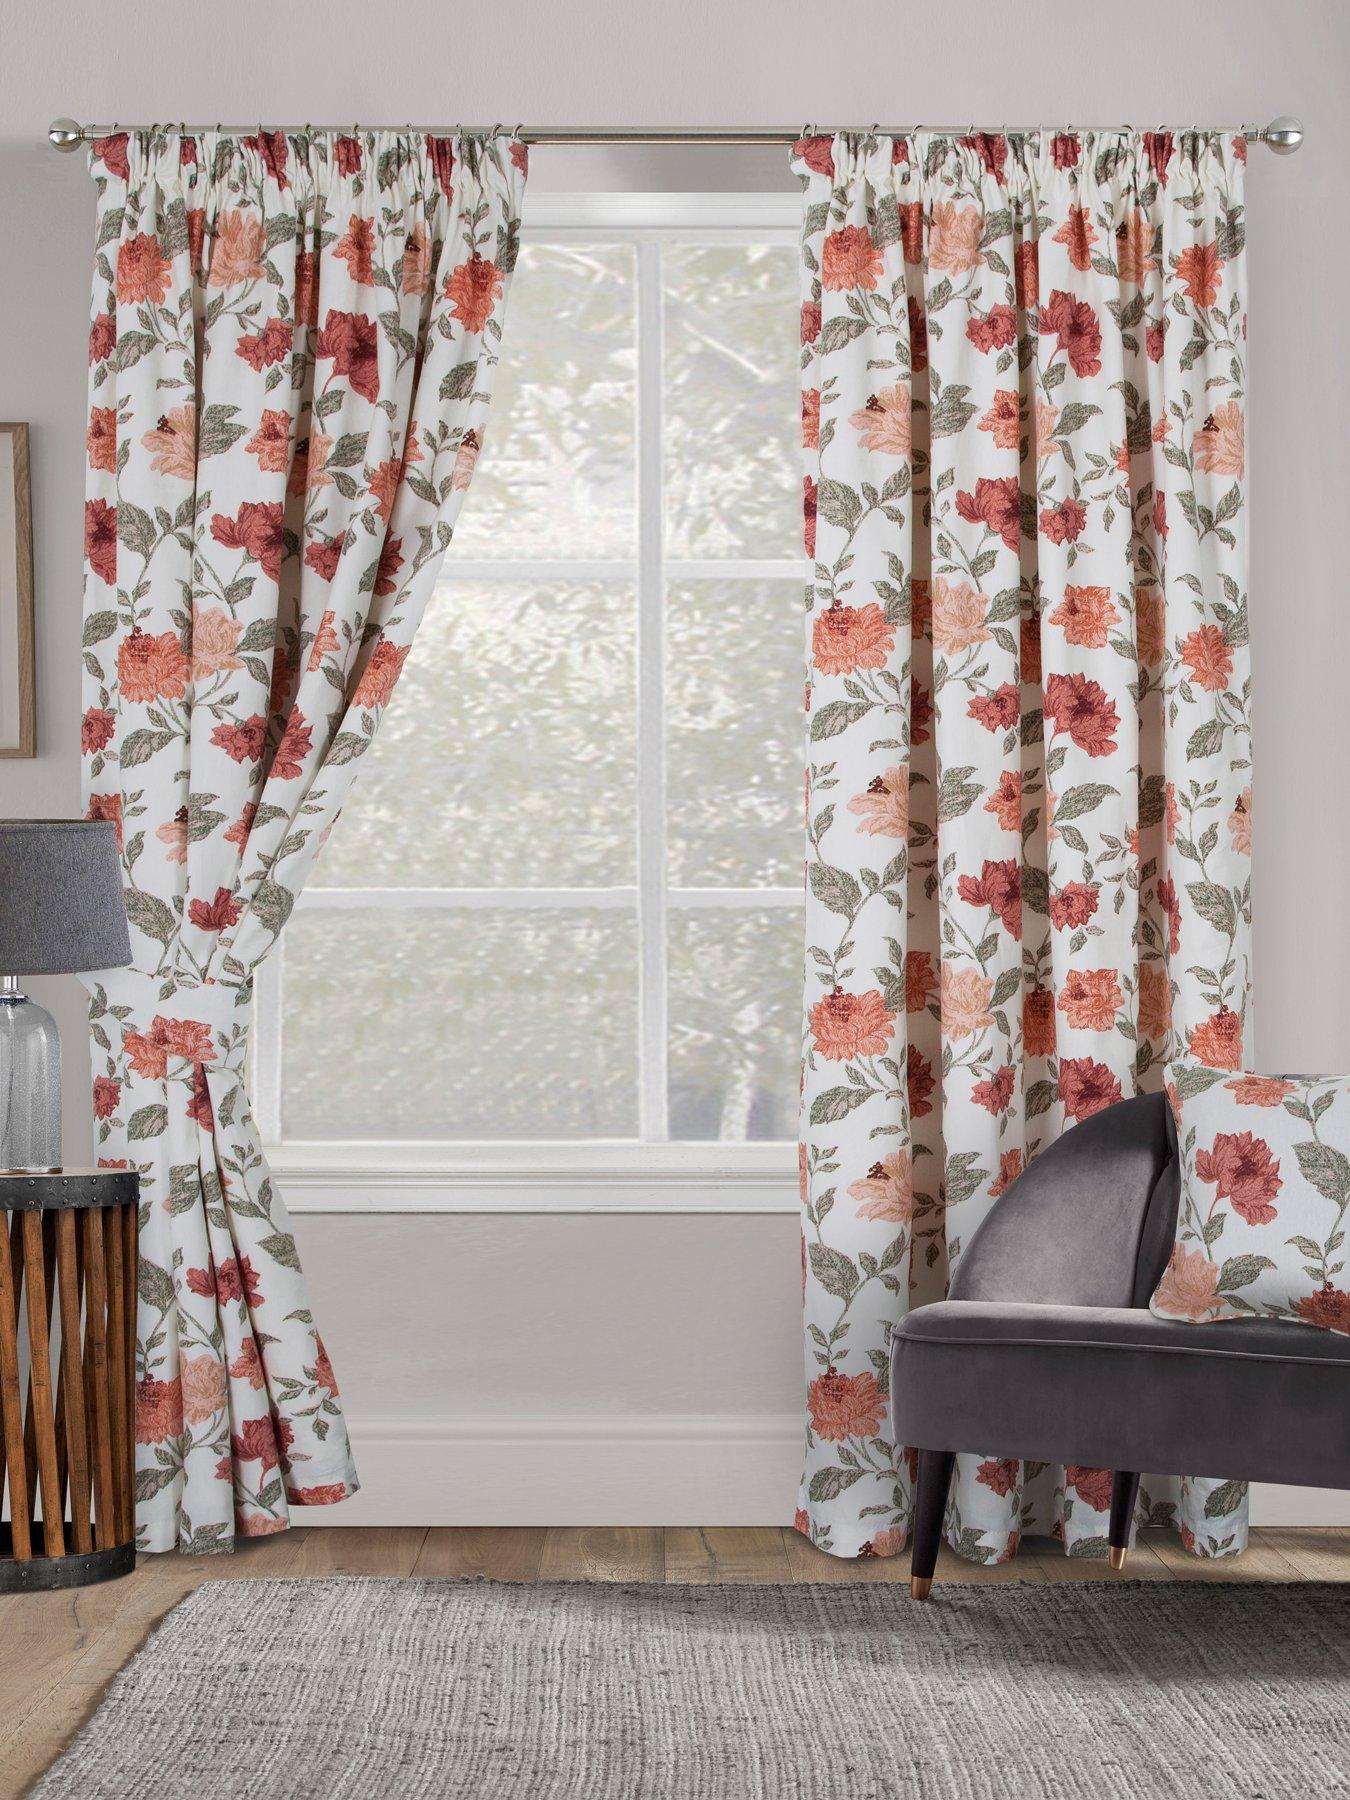 Silky Kelly Golden Black Half Damask Floral Flock With Plain Design Eyelet Ringtop Window Curtains With Tie Backs 66x72, Kelly Gold